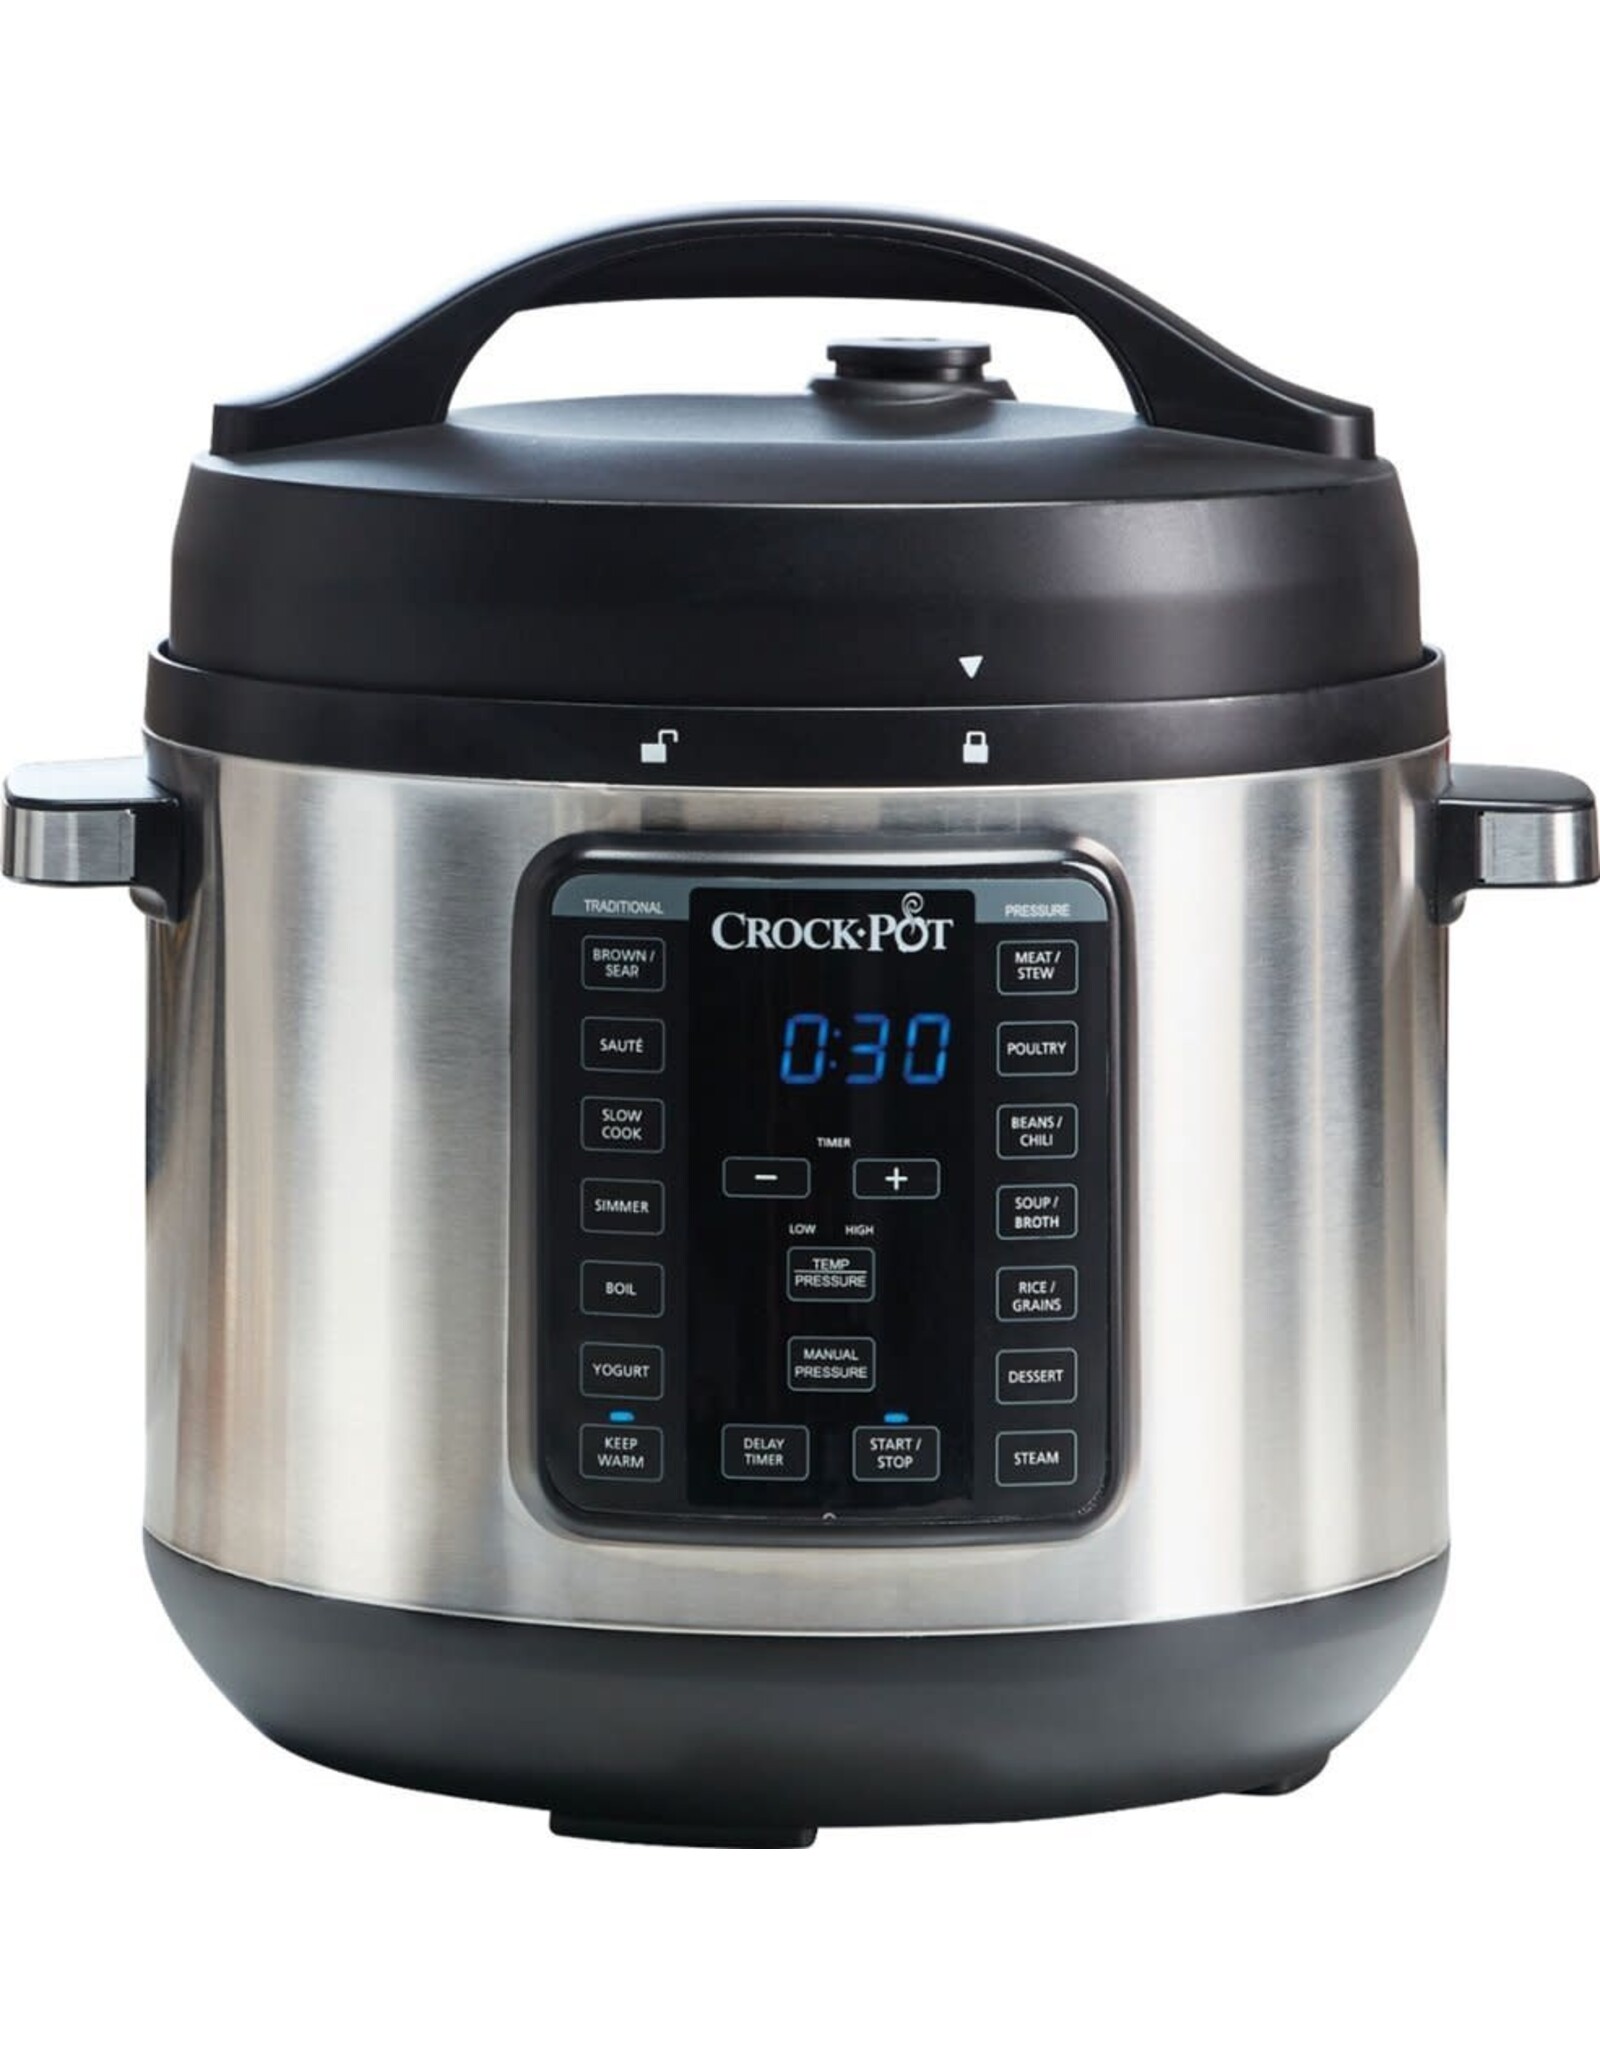 Crock-pot SCCPPC800-V1 Crock-Pot 8-Quart Multi-Use XL Express Crock Programmable Slow Cooker and Pressure Cooker with Manual Pressure, Boil & Simmer, Black Stainless